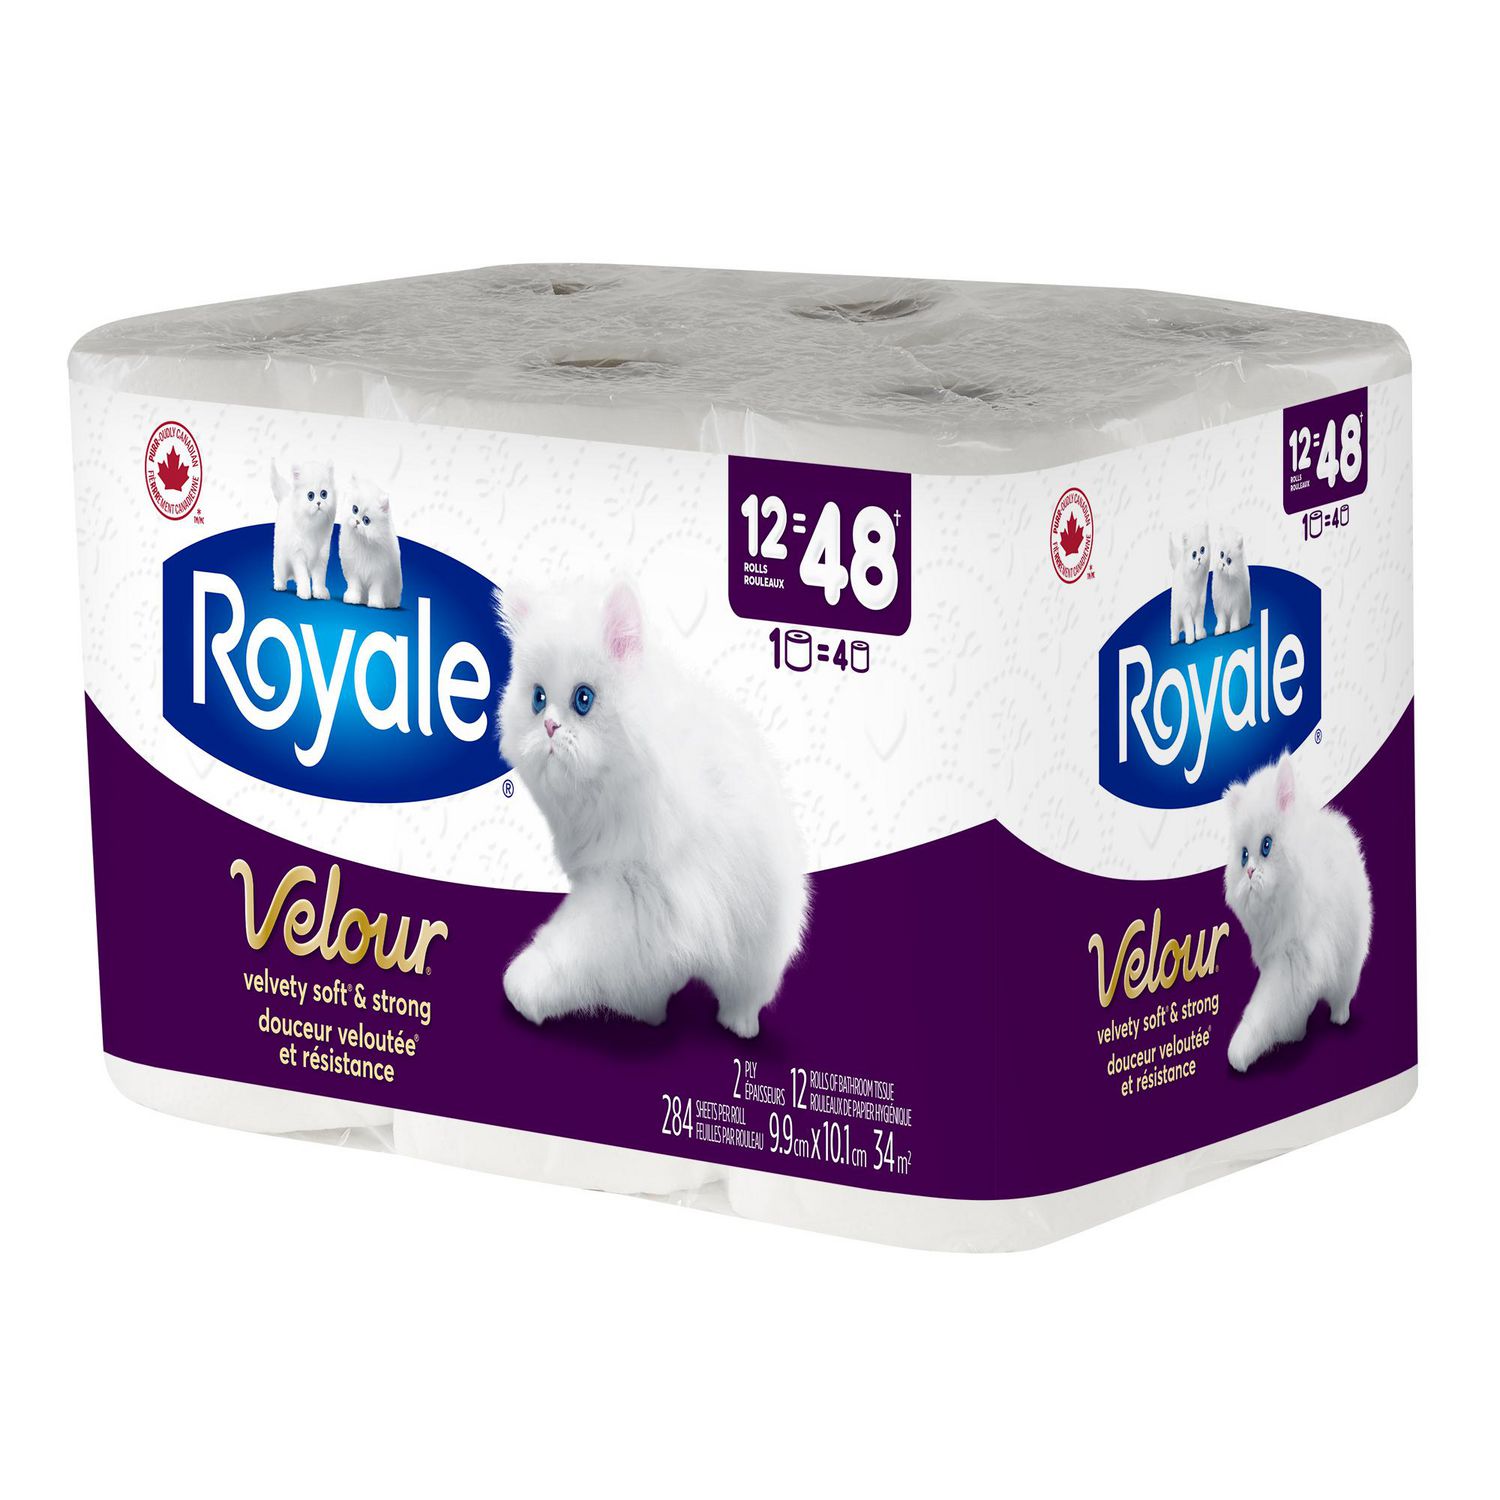 Royale Velour Plush And Thick Toilet Paper Double Rolls (24PK) - Concord  Foods, Toronto/GTA Grocery Delivery